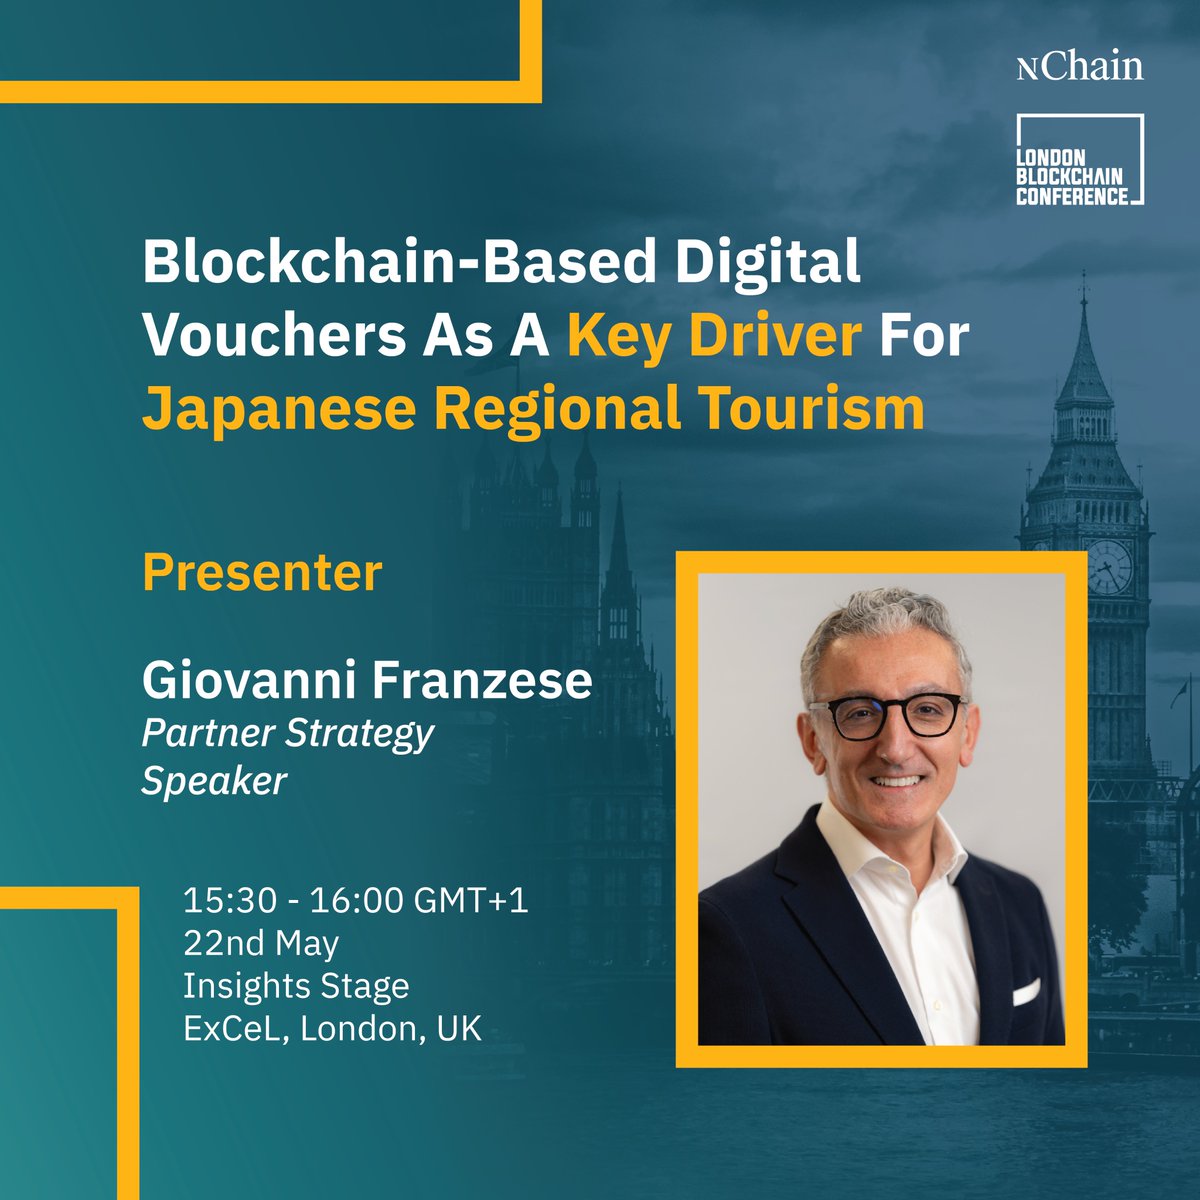 Speaking of real world use cases, our Partner, Strategy Giovanni Franzese @GiovanniFranz will be speaking with Saito San from Keio University at the London Blockchain Conference @LDN_Blockchain. The topic is ‘Blockchain-based digital vouchers as a key driver for Japanese